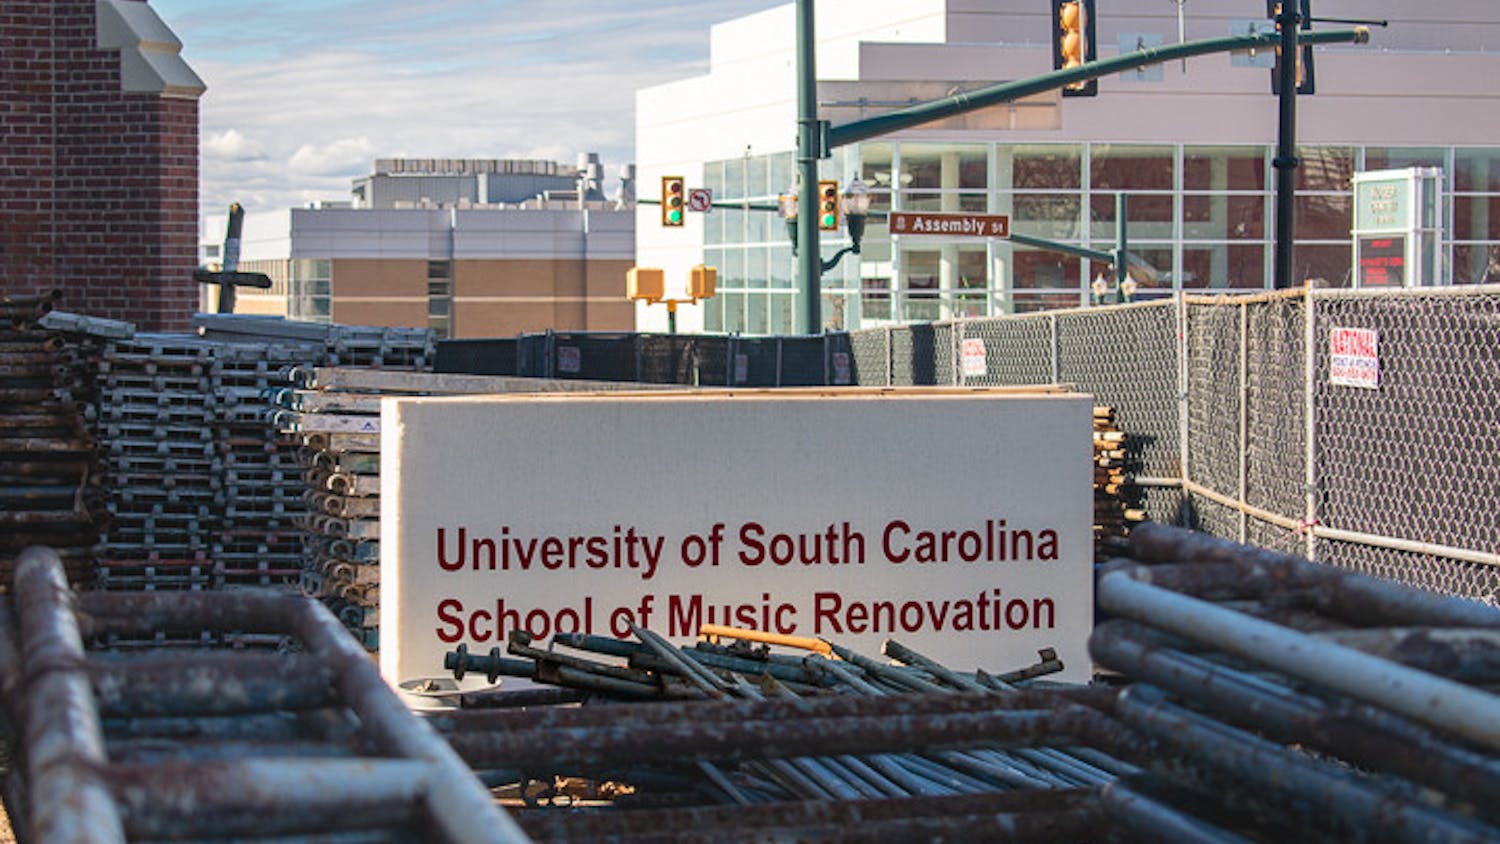 The Greene Street United Methodist Church, now hidden behind metal pipes and pallets, will be the new location of the USC School of Music's jazz program. The first phase of renovation is set to be finished by fall 2023.